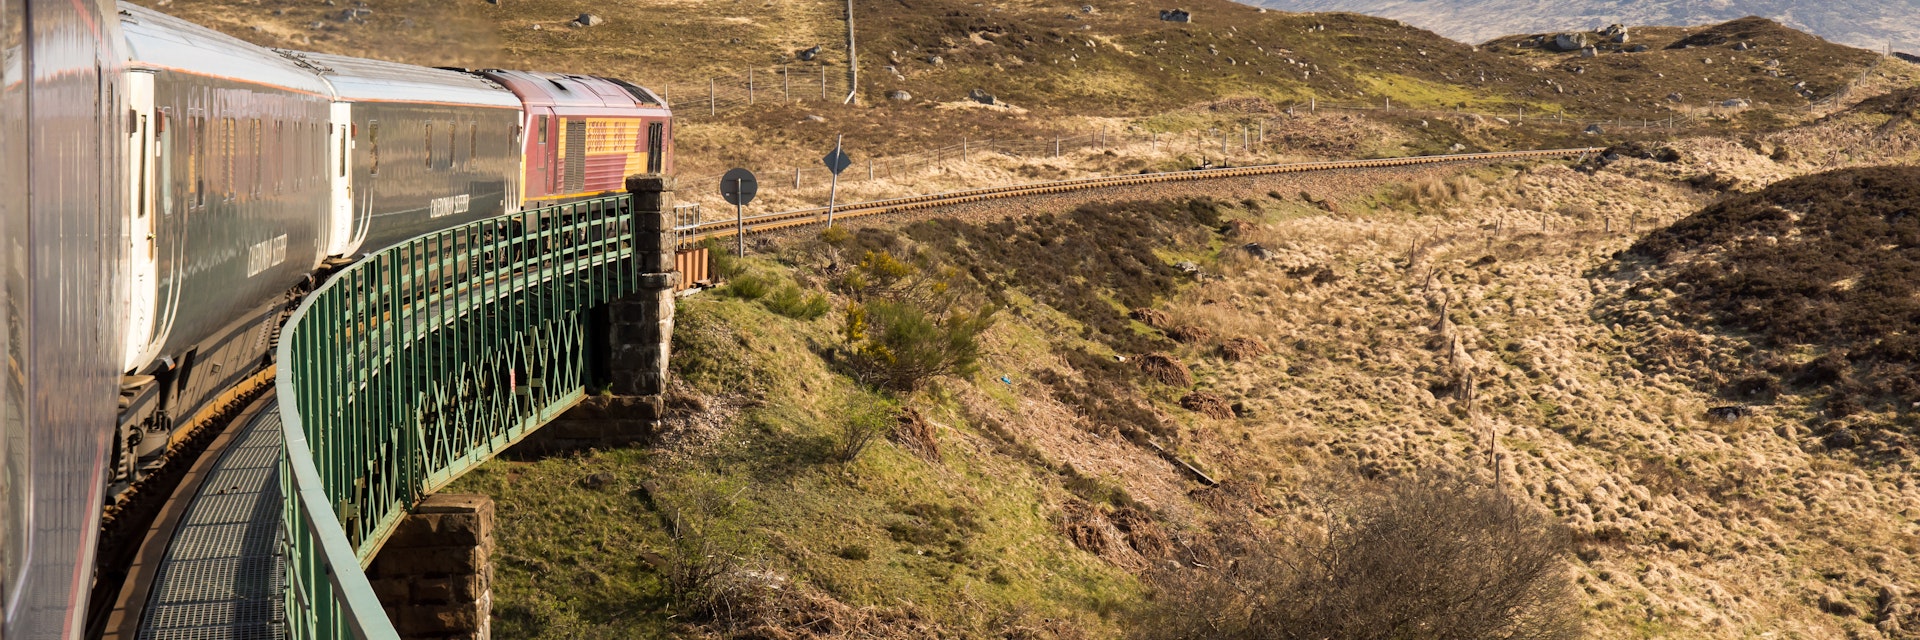 Rannoch, Scotland - May 11, 2016: The Caledonian Sleeper train crosses Rannoch Viaduct on the scenic West Highland Line railway in the Scottish Highlands.